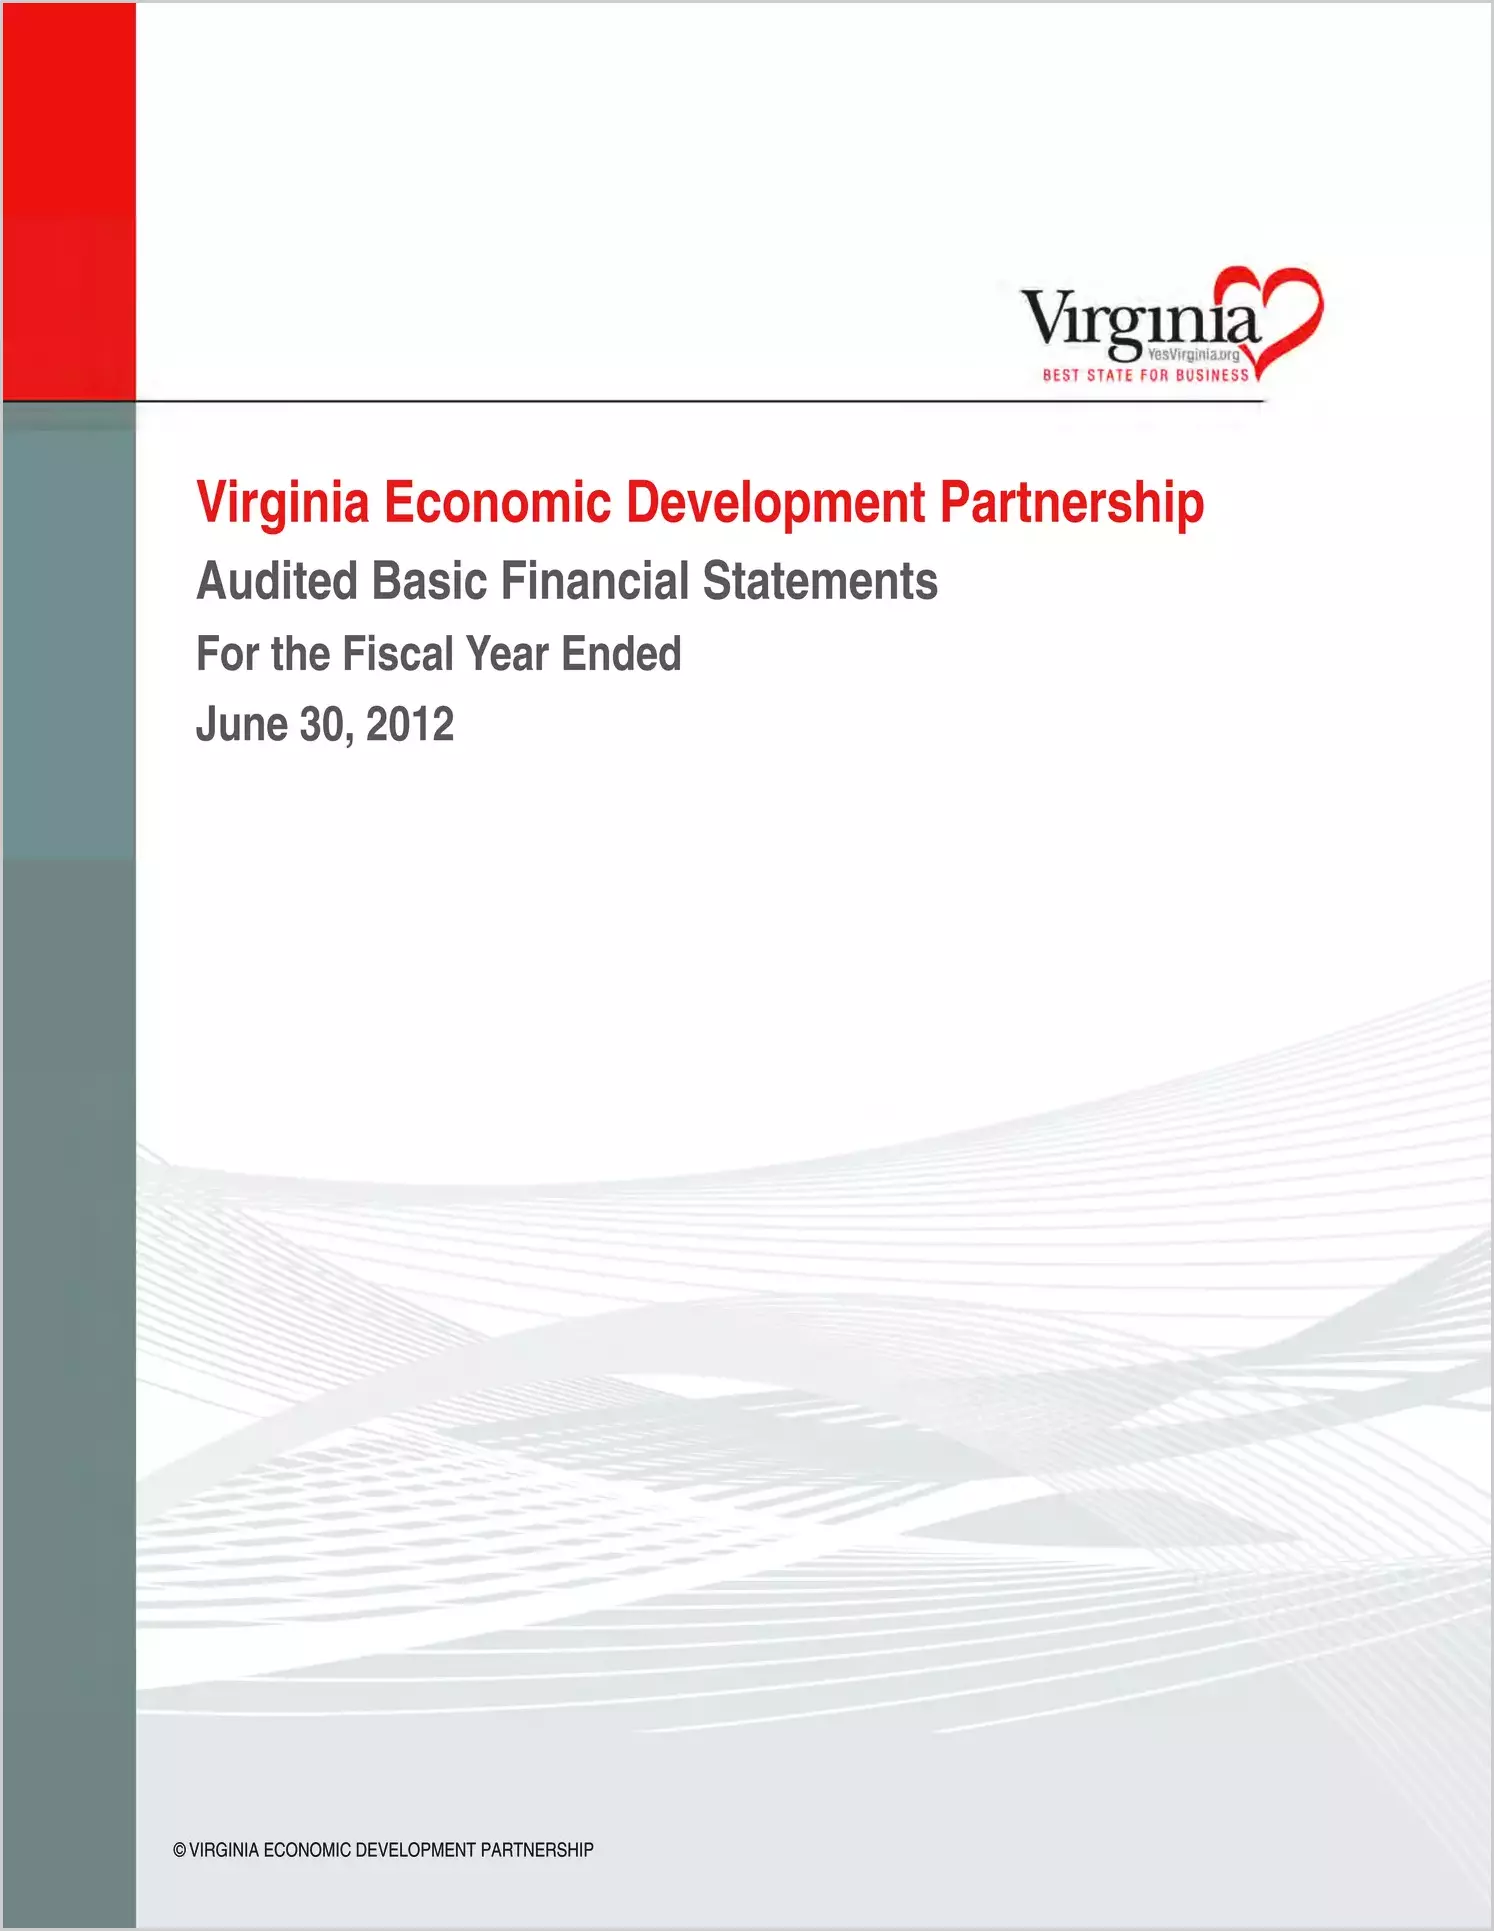 Virginia Economic Development Partnership Financial Statements for the year ended June 30, 2012